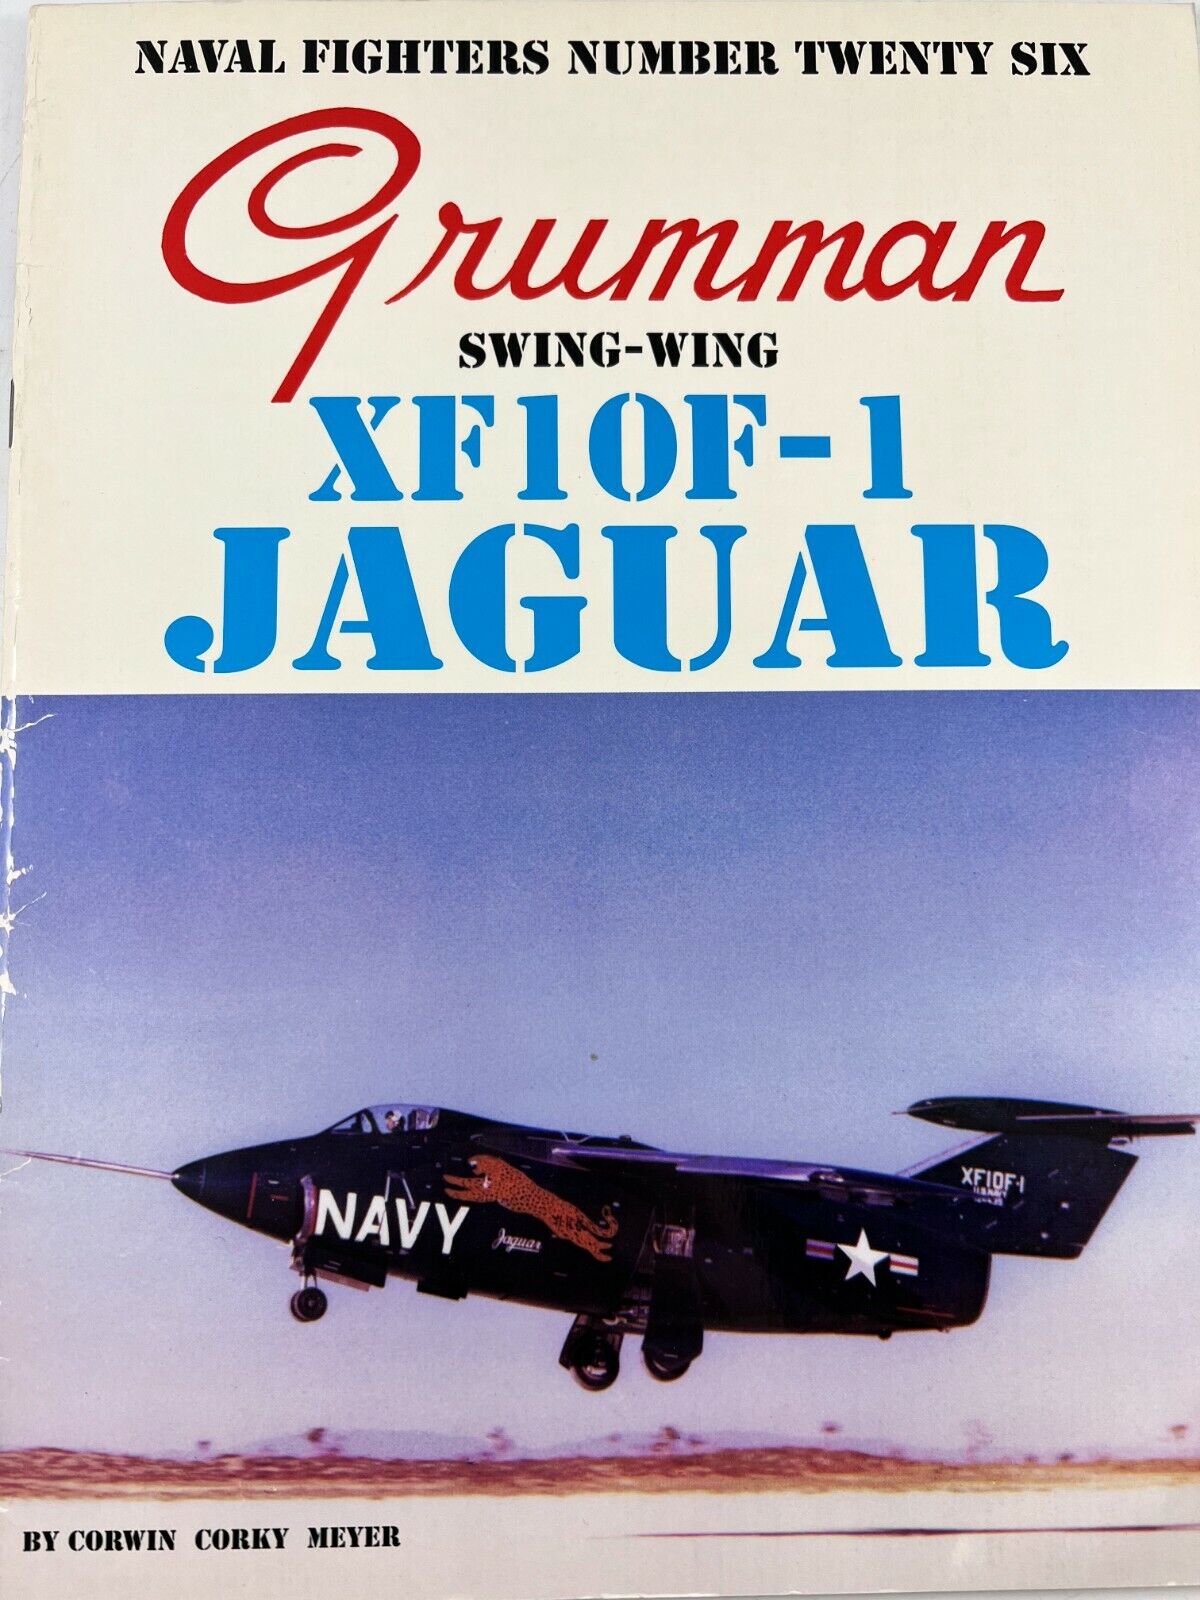 US USN Grumman XF10F-1 Jaguar Naval Fighters 26 Soft Cover Reference Book